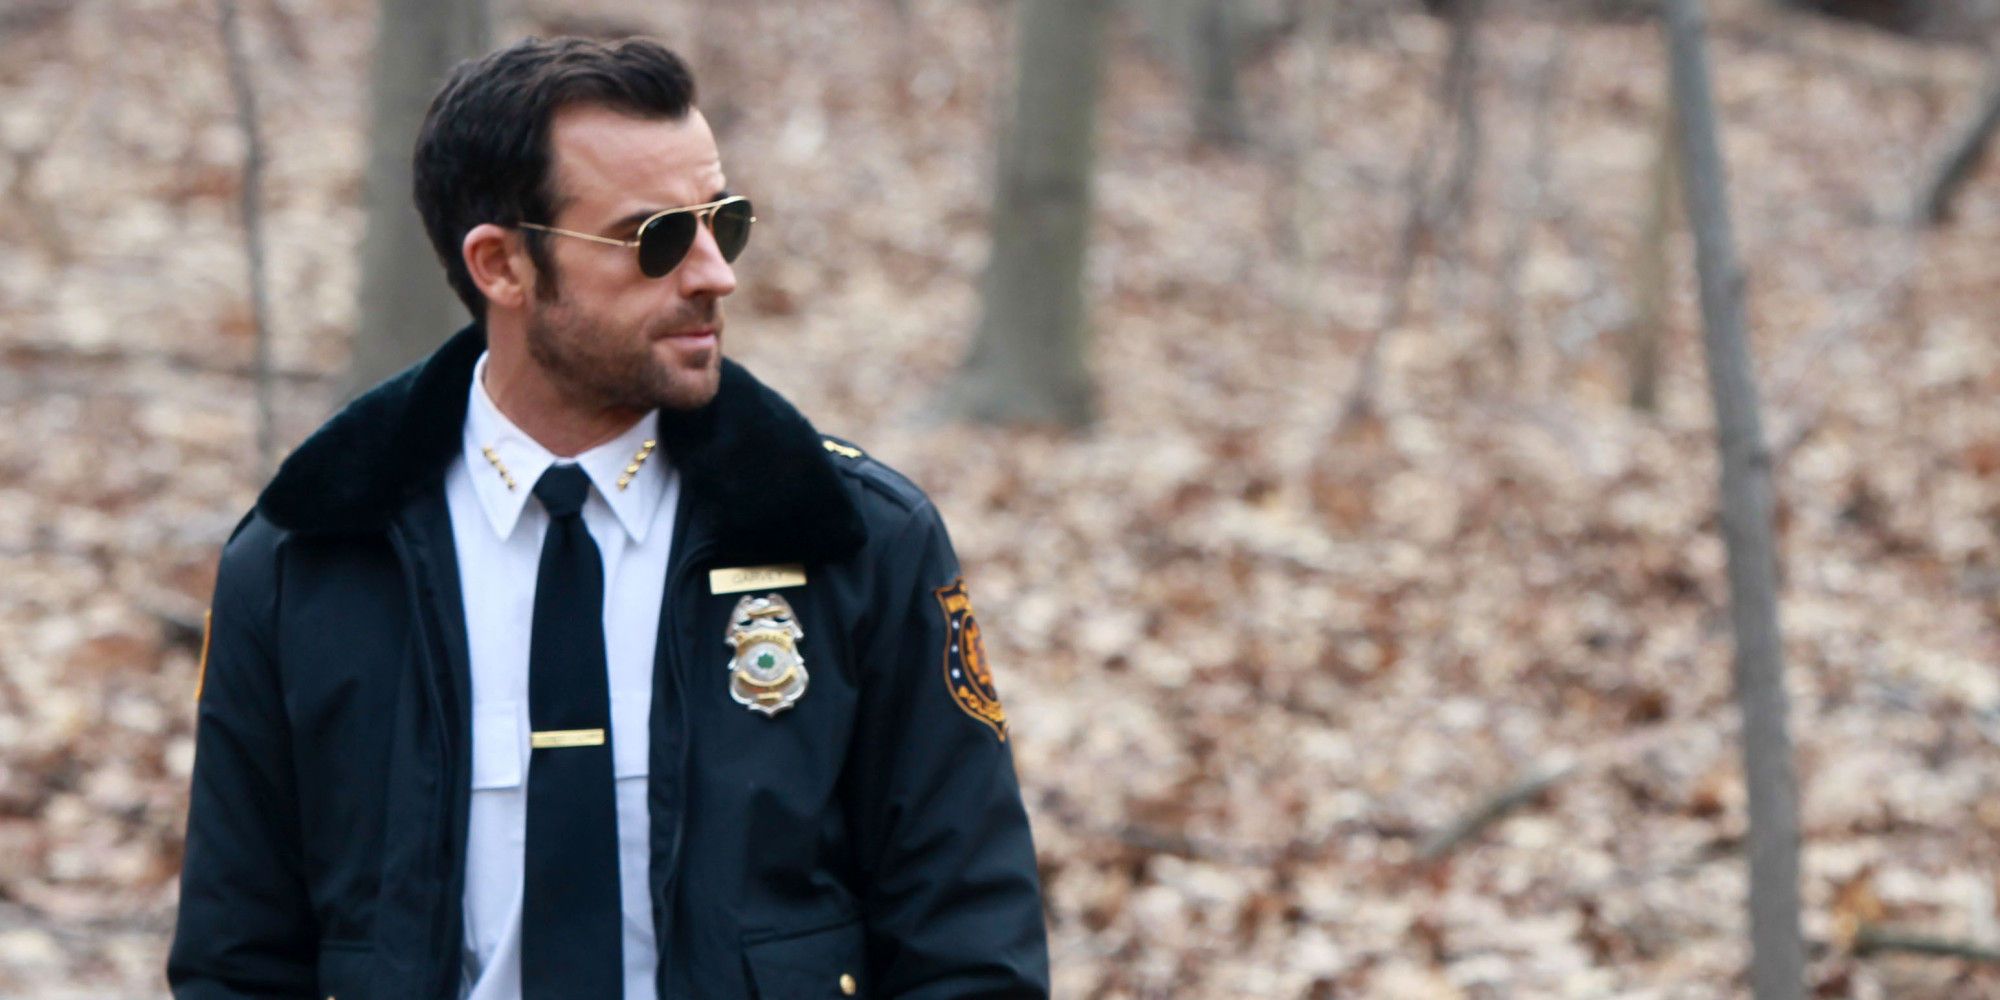 The Leftovers - Justin Theroux as Kevin Garvey in his police officer uniform